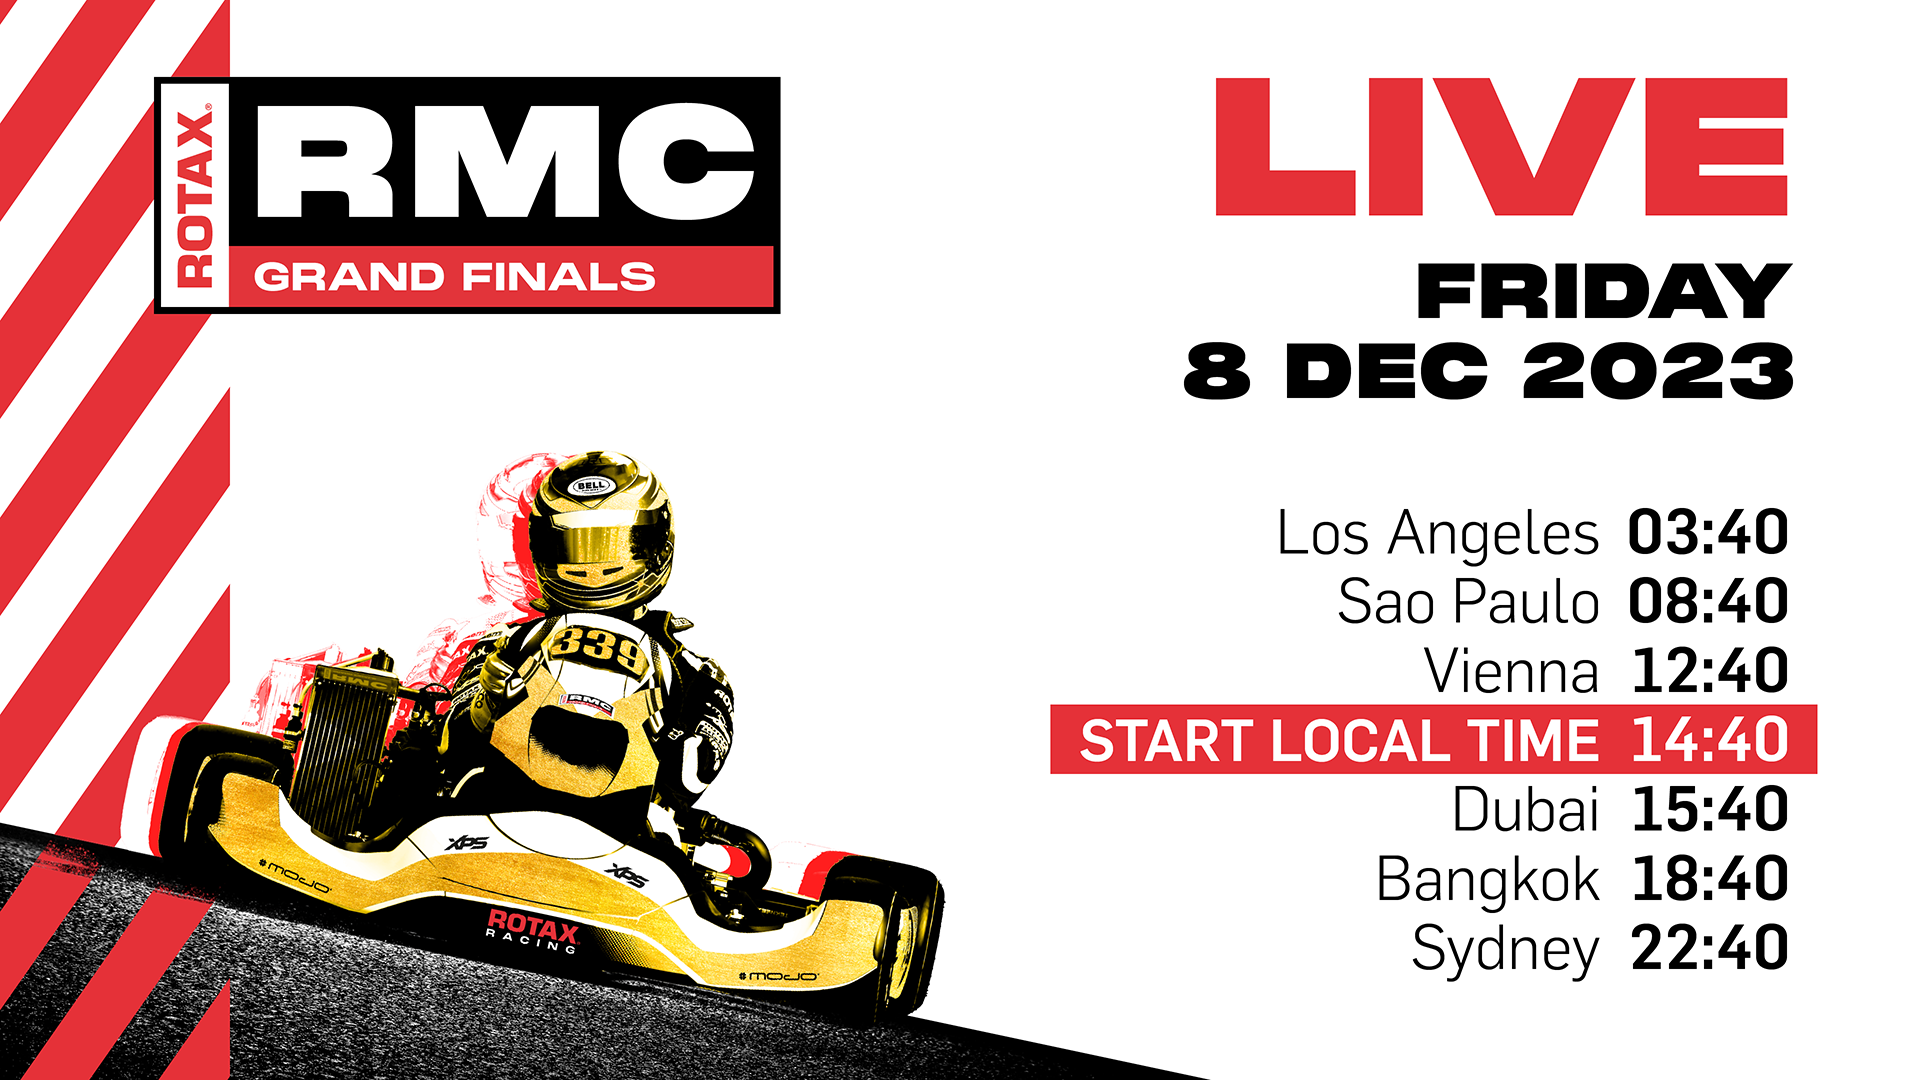 ROTAX RMCGF 2023 You Tube Channel LIVE TV 1920x1080px 08 12